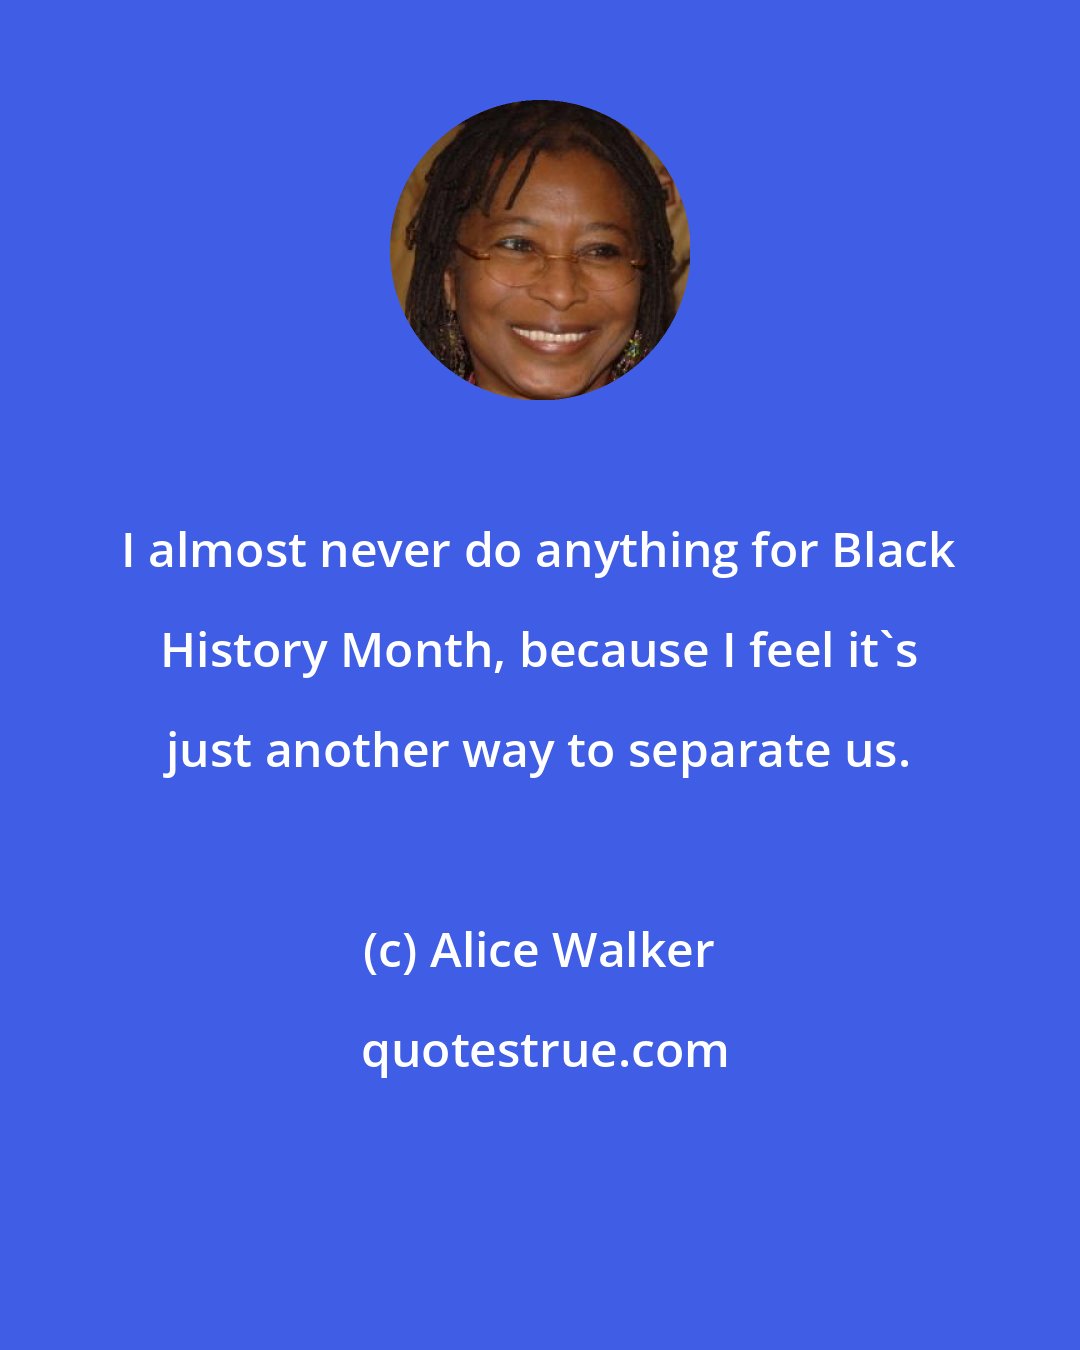 Alice Walker: I almost never do anything for Black History Month, because I feel it's just another way to separate us.